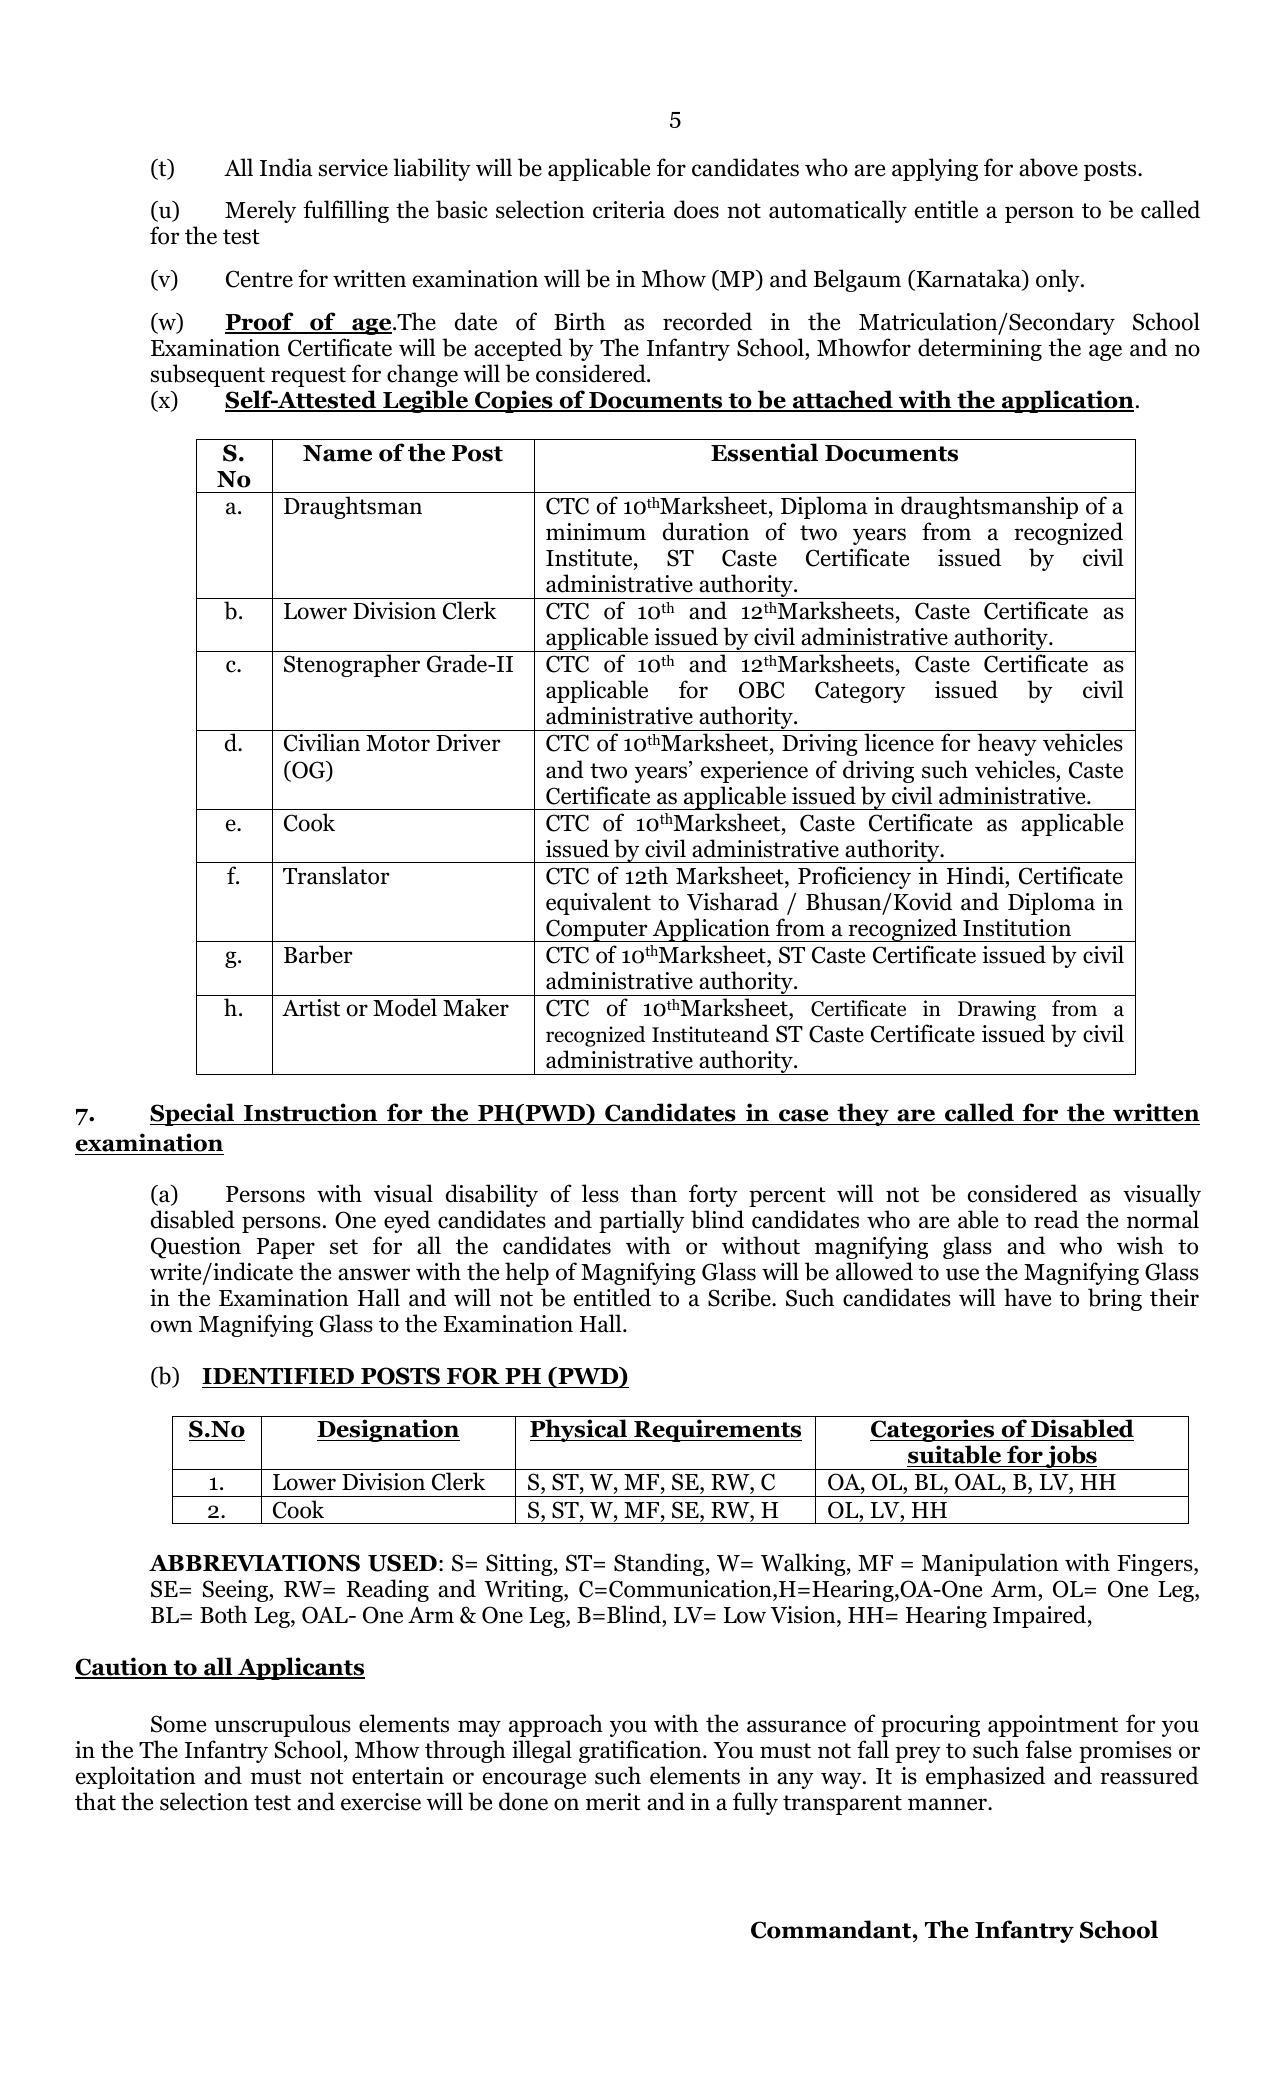 HQ Infantry School MHOW Invites Application for 101 Lower Division Clerk, Stenographer and Various POsts - Page 6